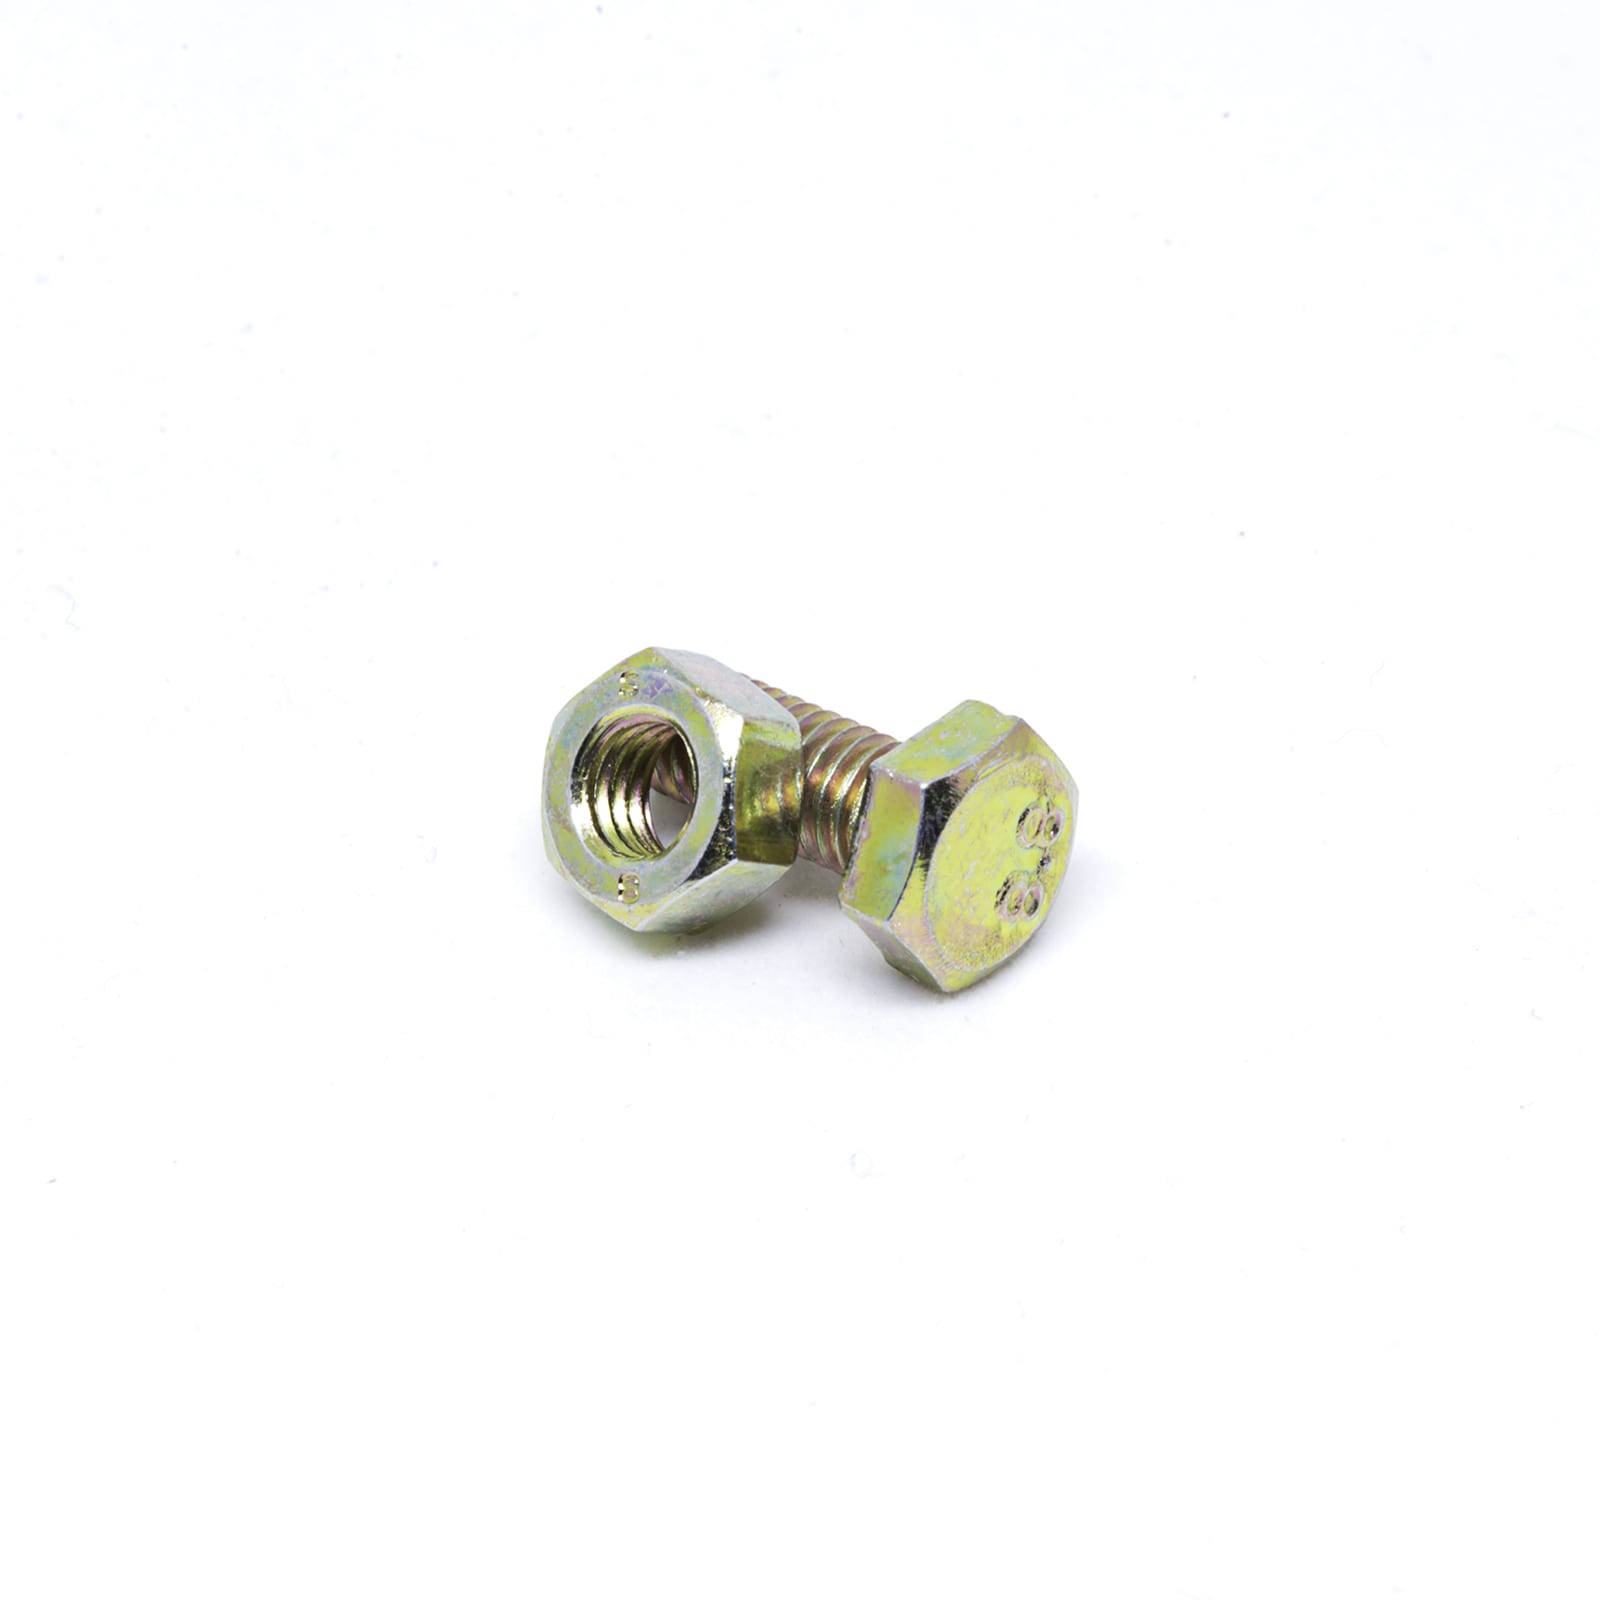 HIGH TENSILE HEX BOLTS & NUTS M5 x 30MM